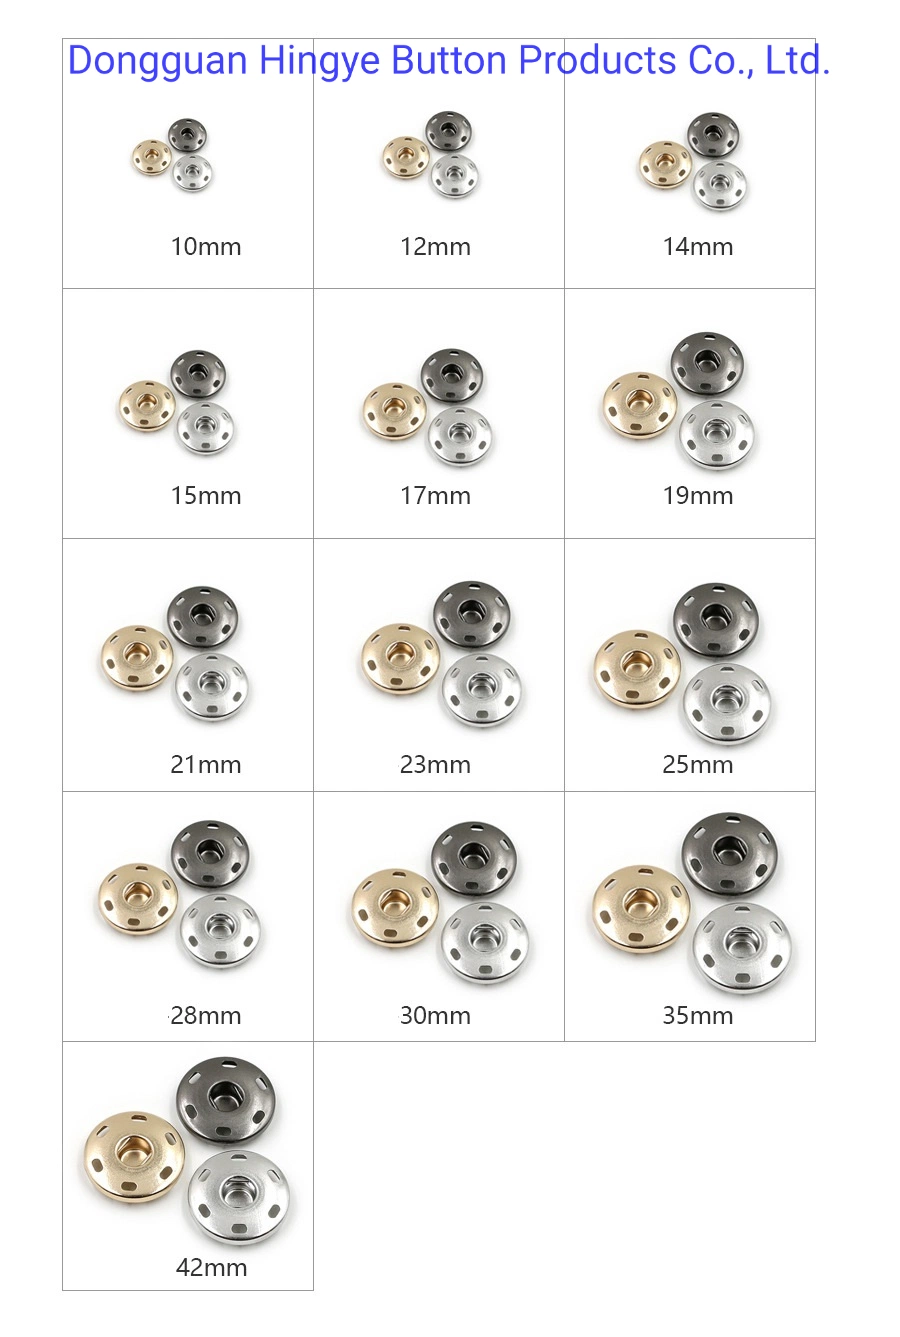 Two Parts Metal Press Snap Studs Button